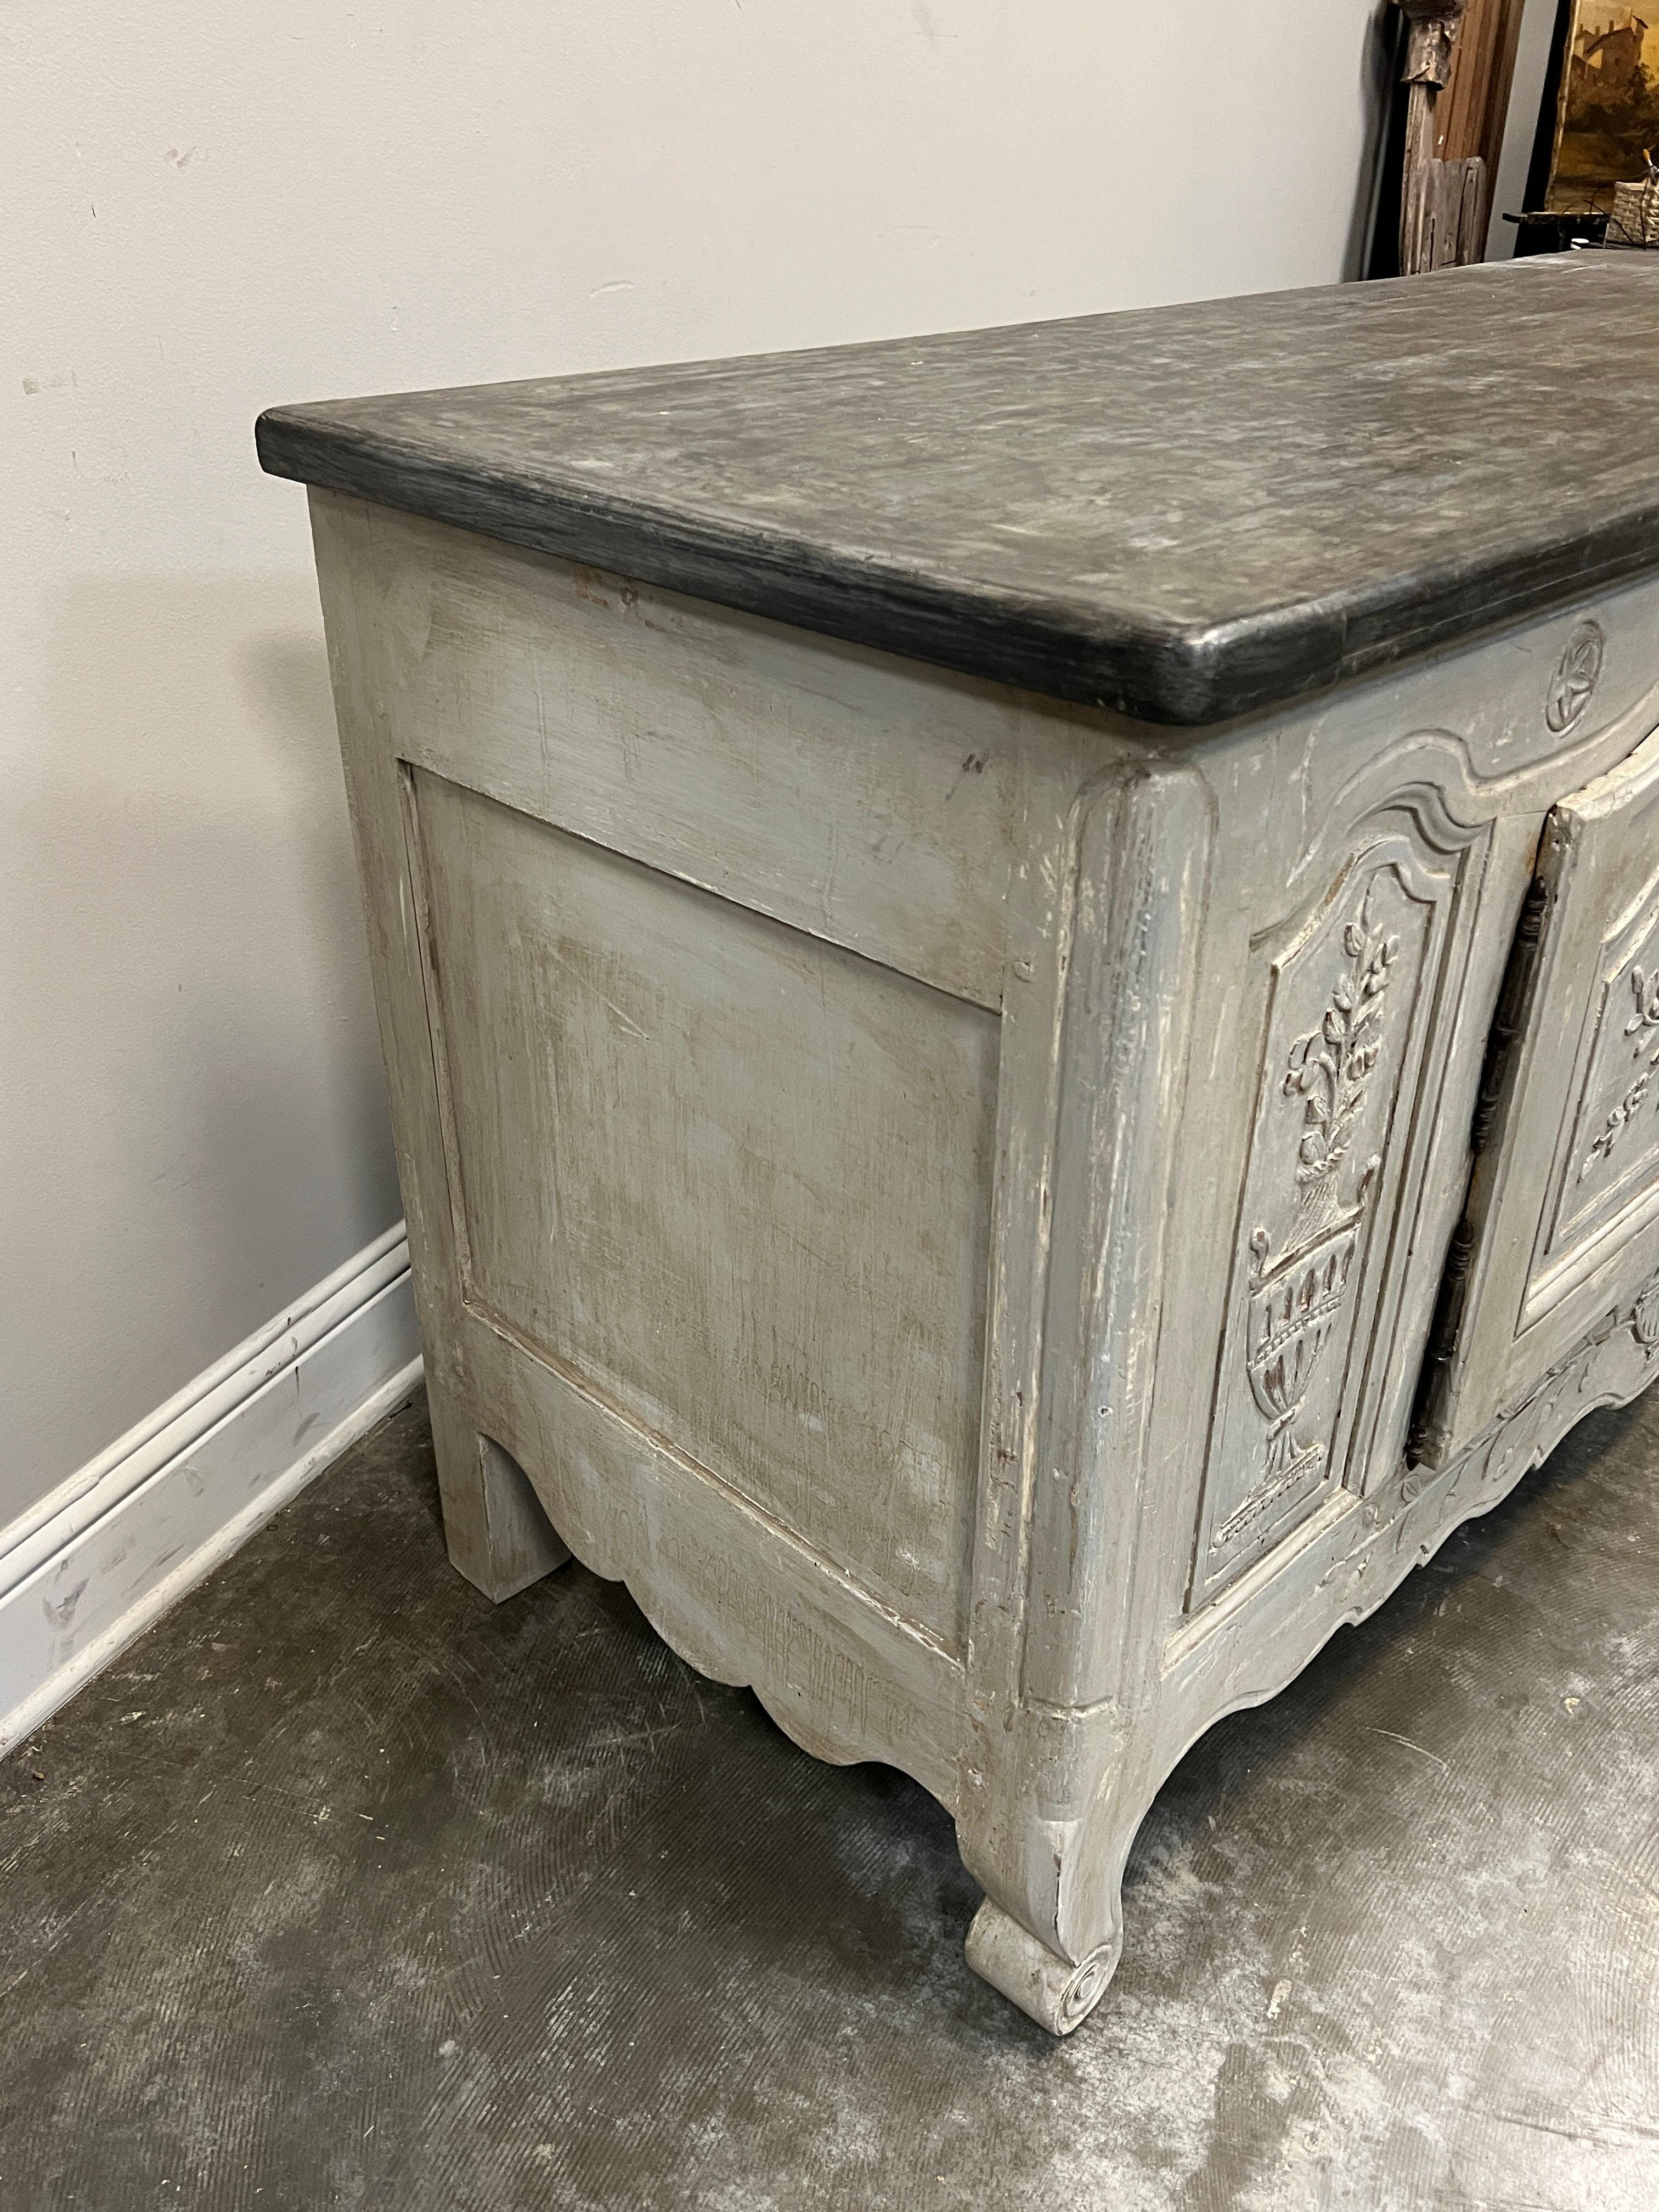 This buffet is a really charming painted Louis XV French Provincial buffet from the early 19th C. showing tool marks confirming its hand made origin. The buffet has an unusual placement of molded and beveled arched door panels with two center arched